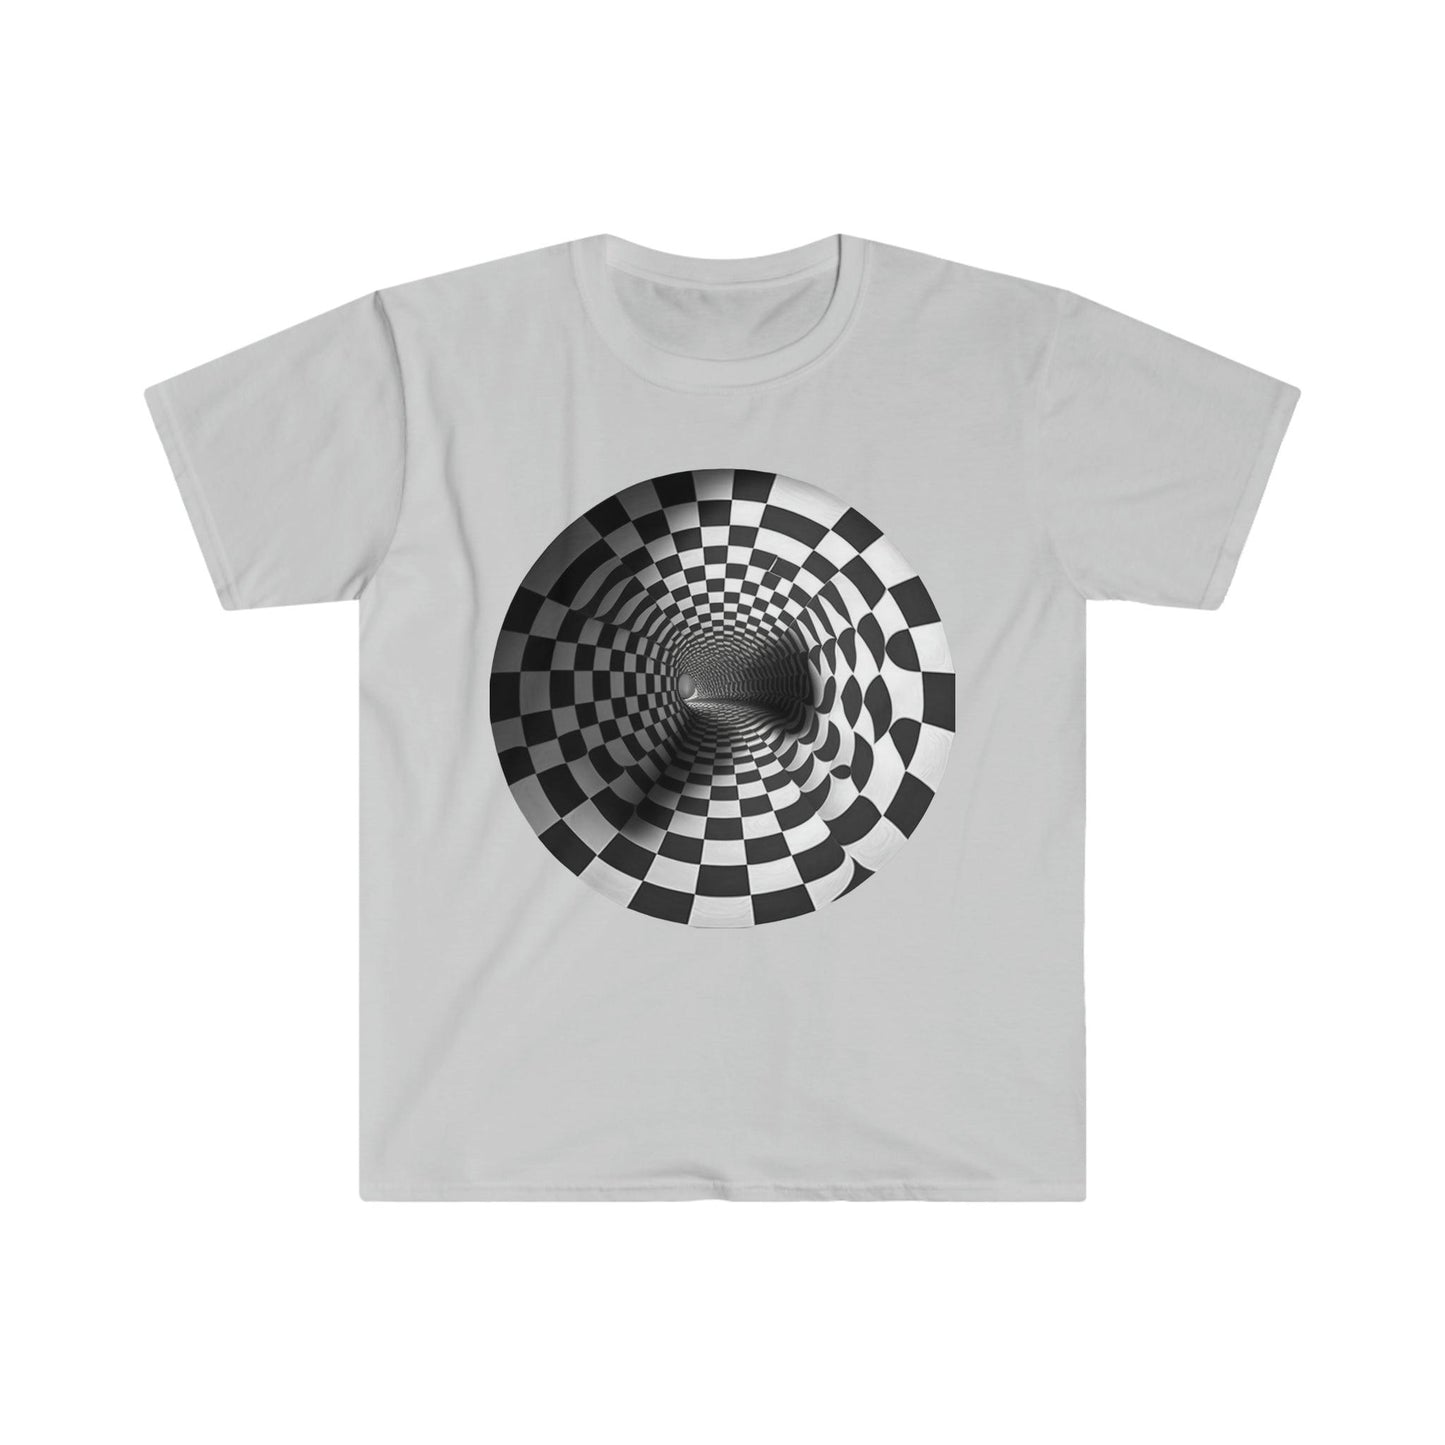 Infinite Tunnel : A Captivating Optical Illusion - Visionary Psychedelic Ai Art Men's and Women's Unisex Soft Style T-Shirt for Festival and Street Wear Tunnel v1.1 - Alchemystics.org